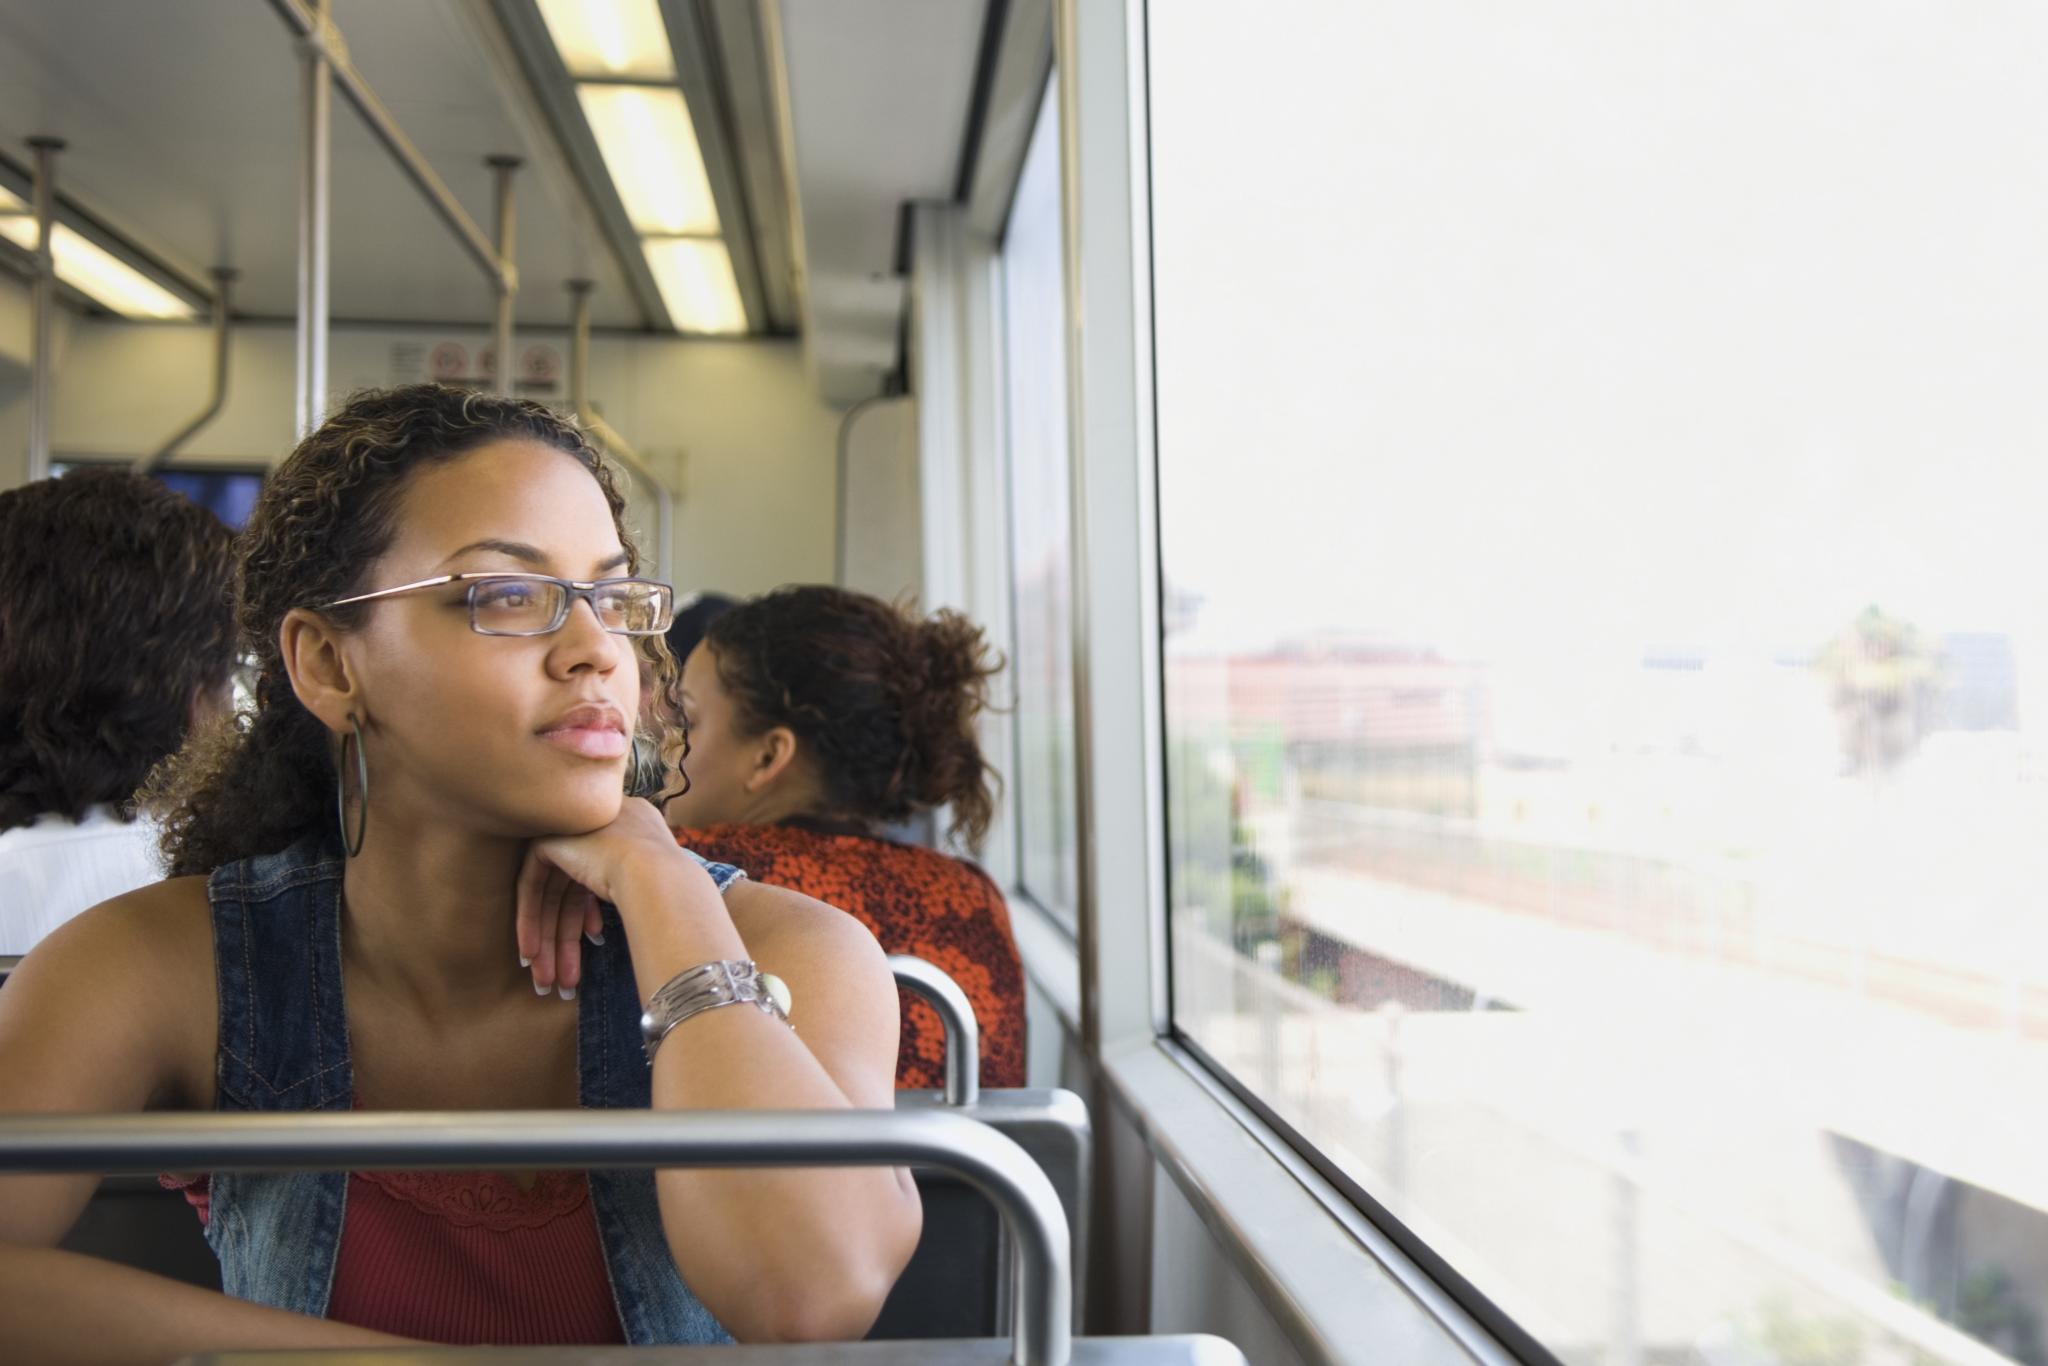 ESSENCE Poll: What Would You Do if You Saw Someone With a Gun on Public Transportation?